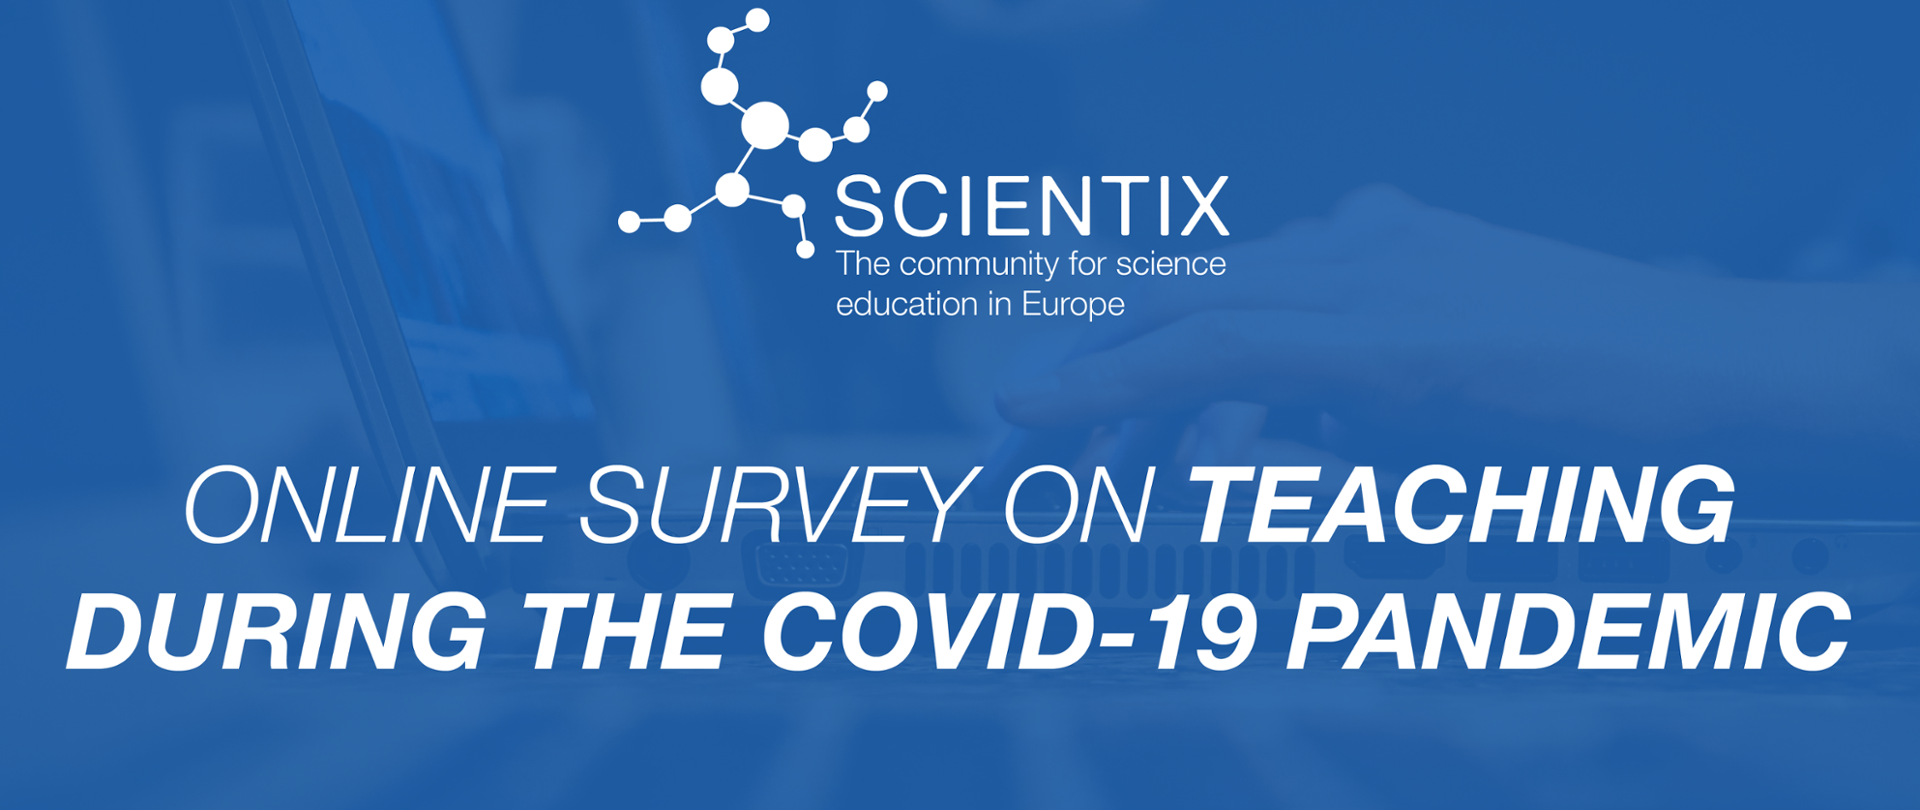 Na górze logotyp i napis Scientix The community for science education in Europe.
Na dole napis Online survey on teaching during the covid-19 pandemic